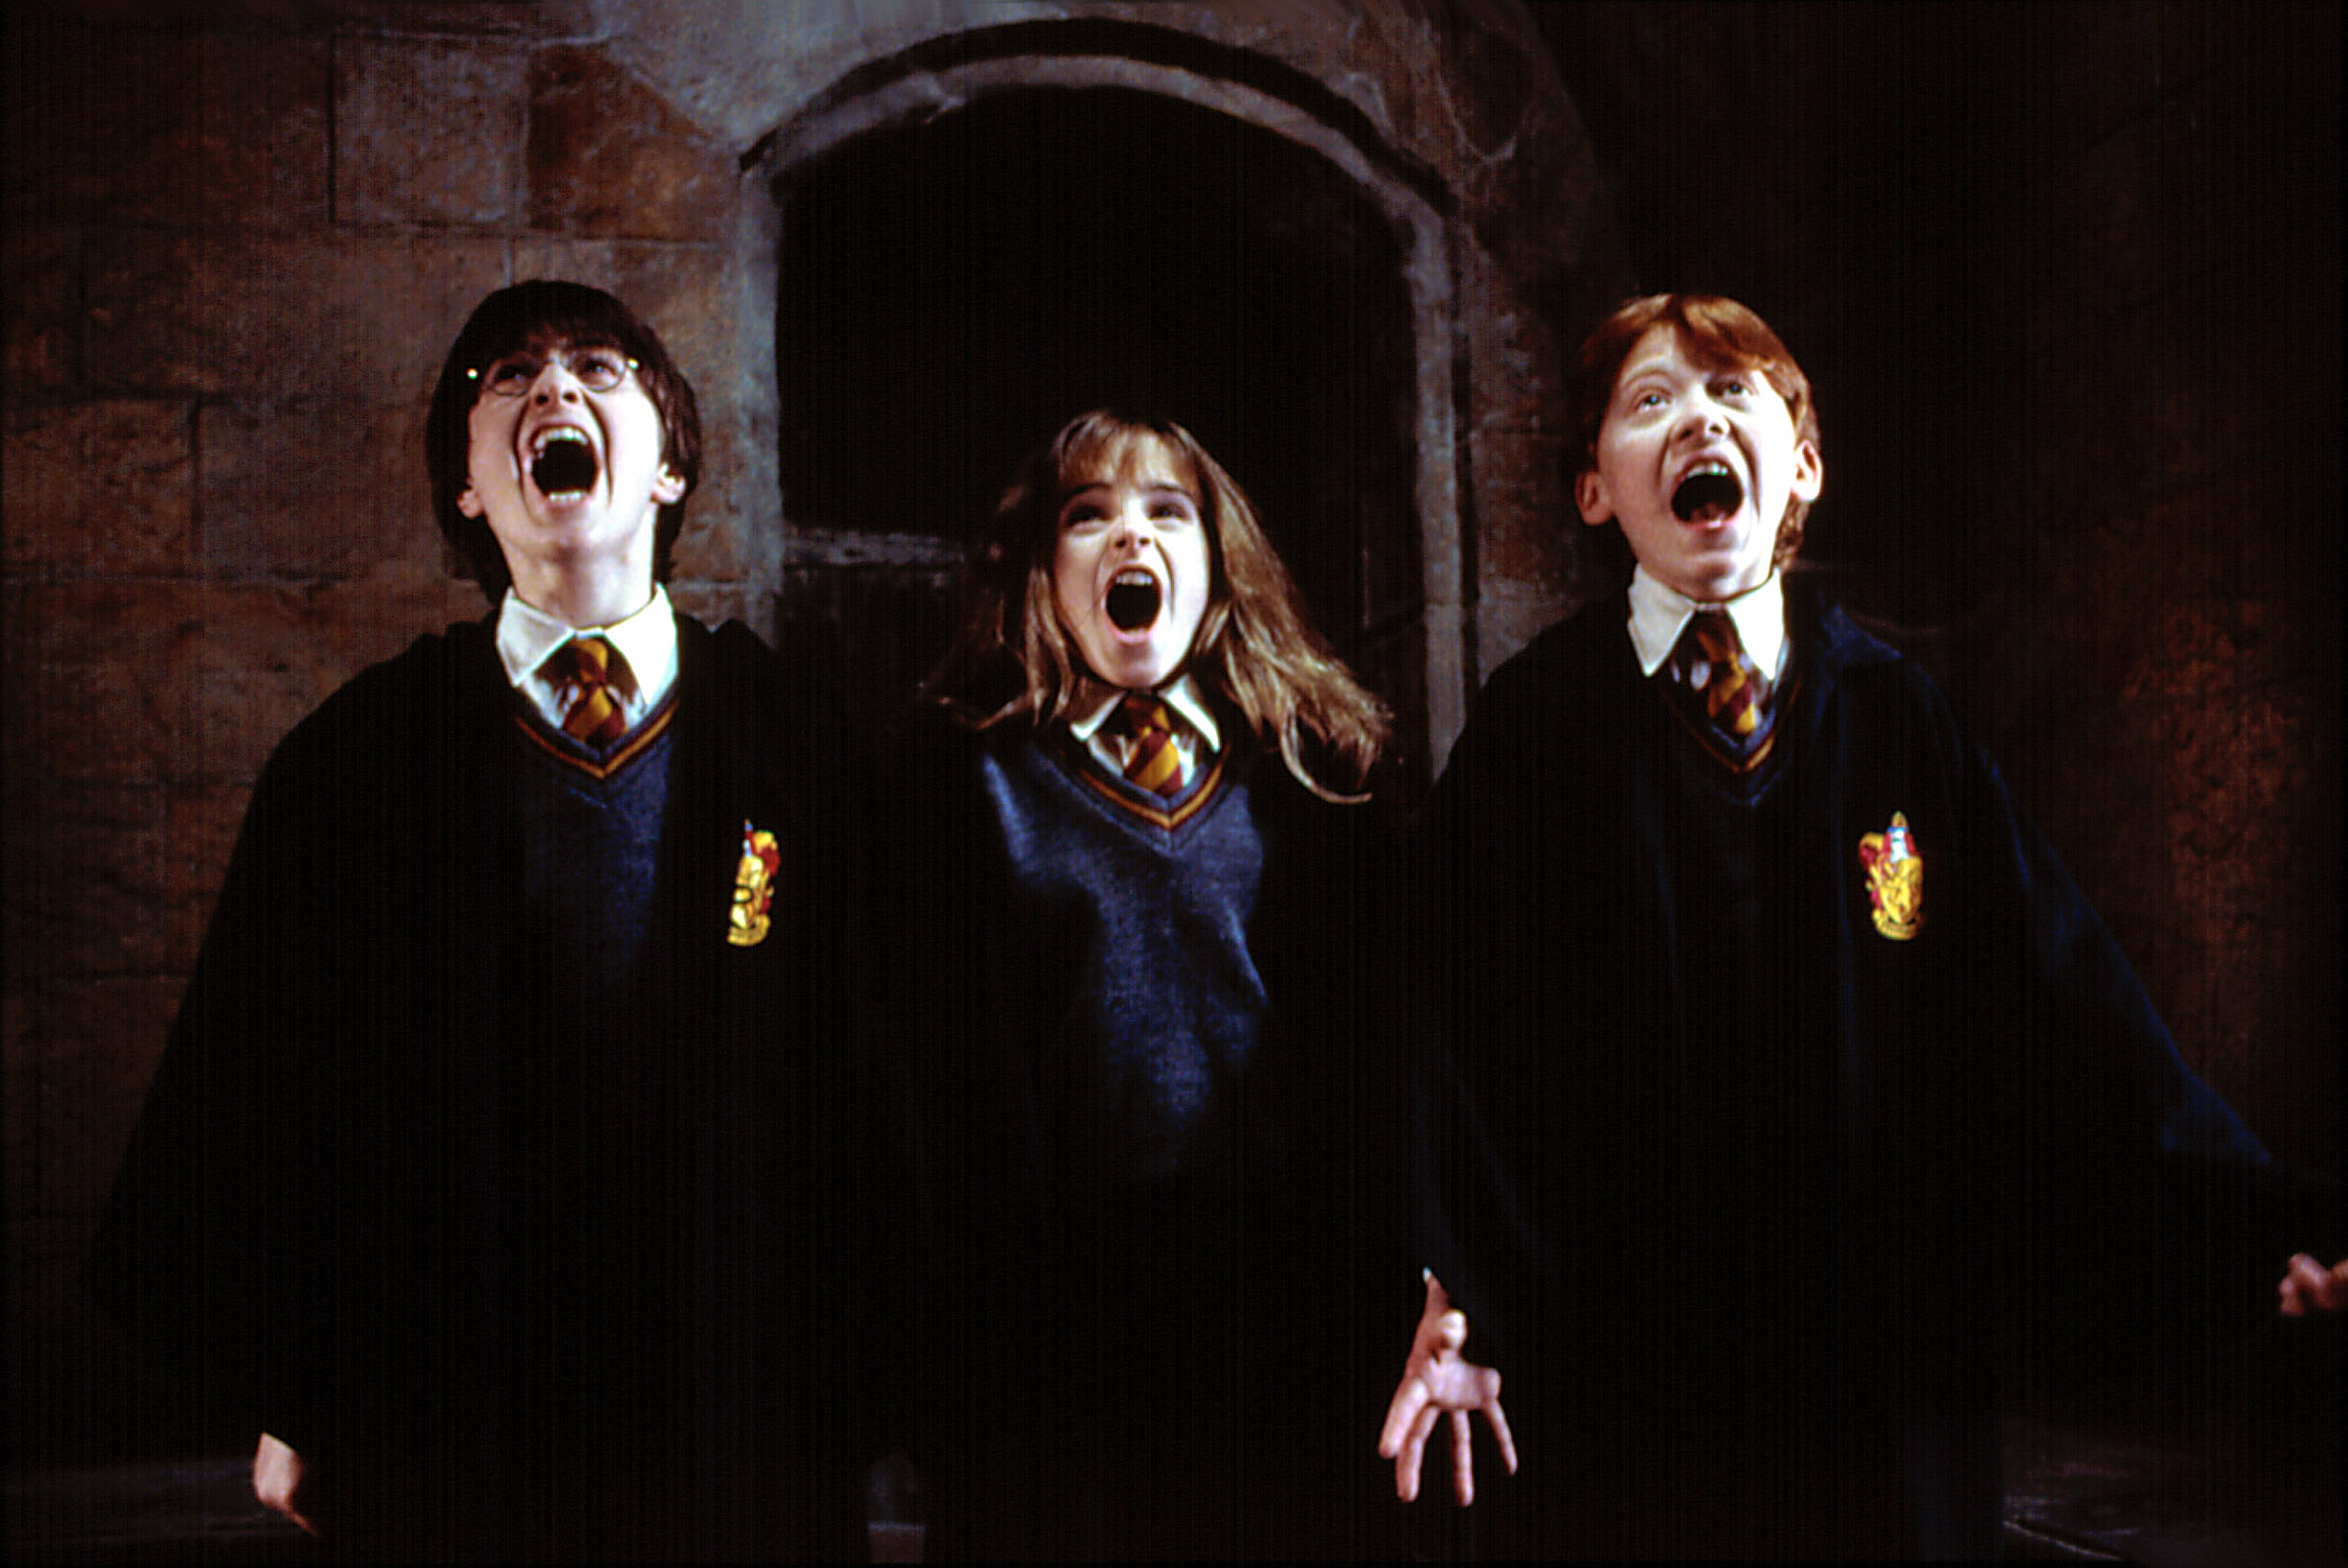 Every Harry Potter Movie Is Coming Back to Theaters. Here's How to Get $5 Tickets Now